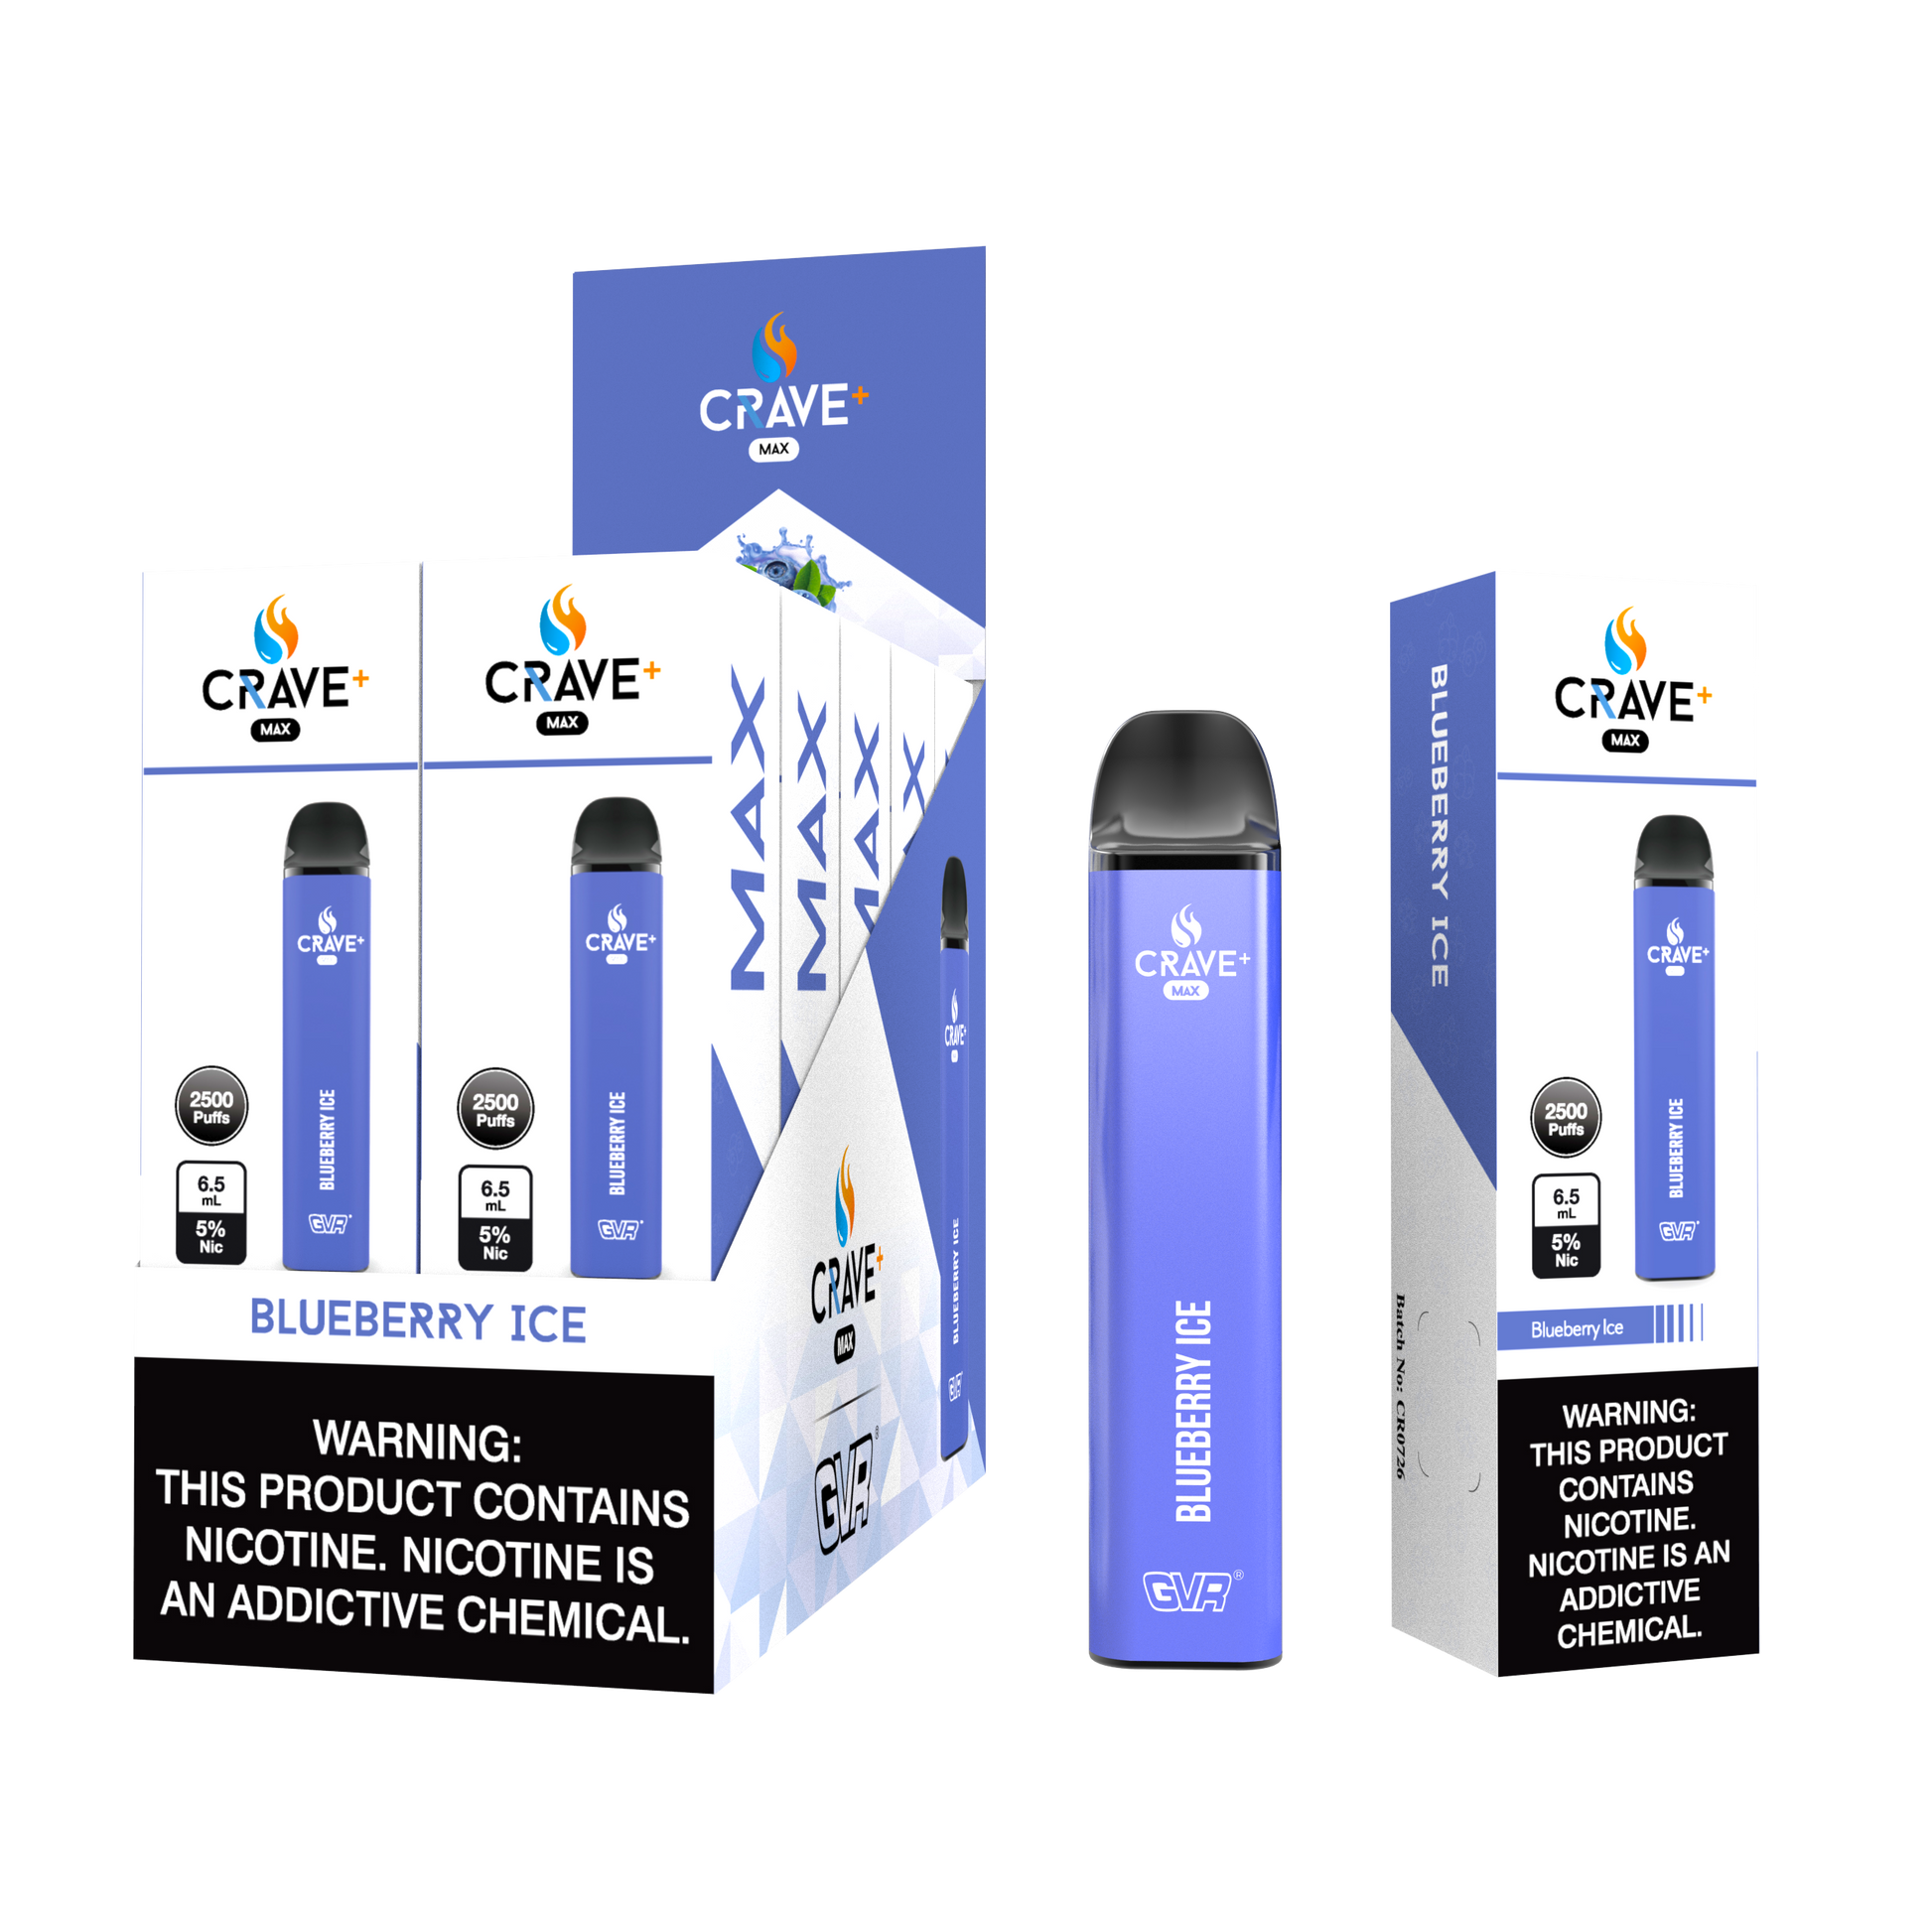 crave max, crave max blueberry ice, crave blueberry ice, crave max blue ice, crave max clear, crave max flavors, crave max for sale, buy crave max online, buy crave online, crave max gvr, crave max disposable 2500 puffs,  crave max bulk, crave disposable bulk, crave max disposable 2500 puffs,  crave max bulk, crave disposable bulk, crave max disposable, crave max blueberry ice